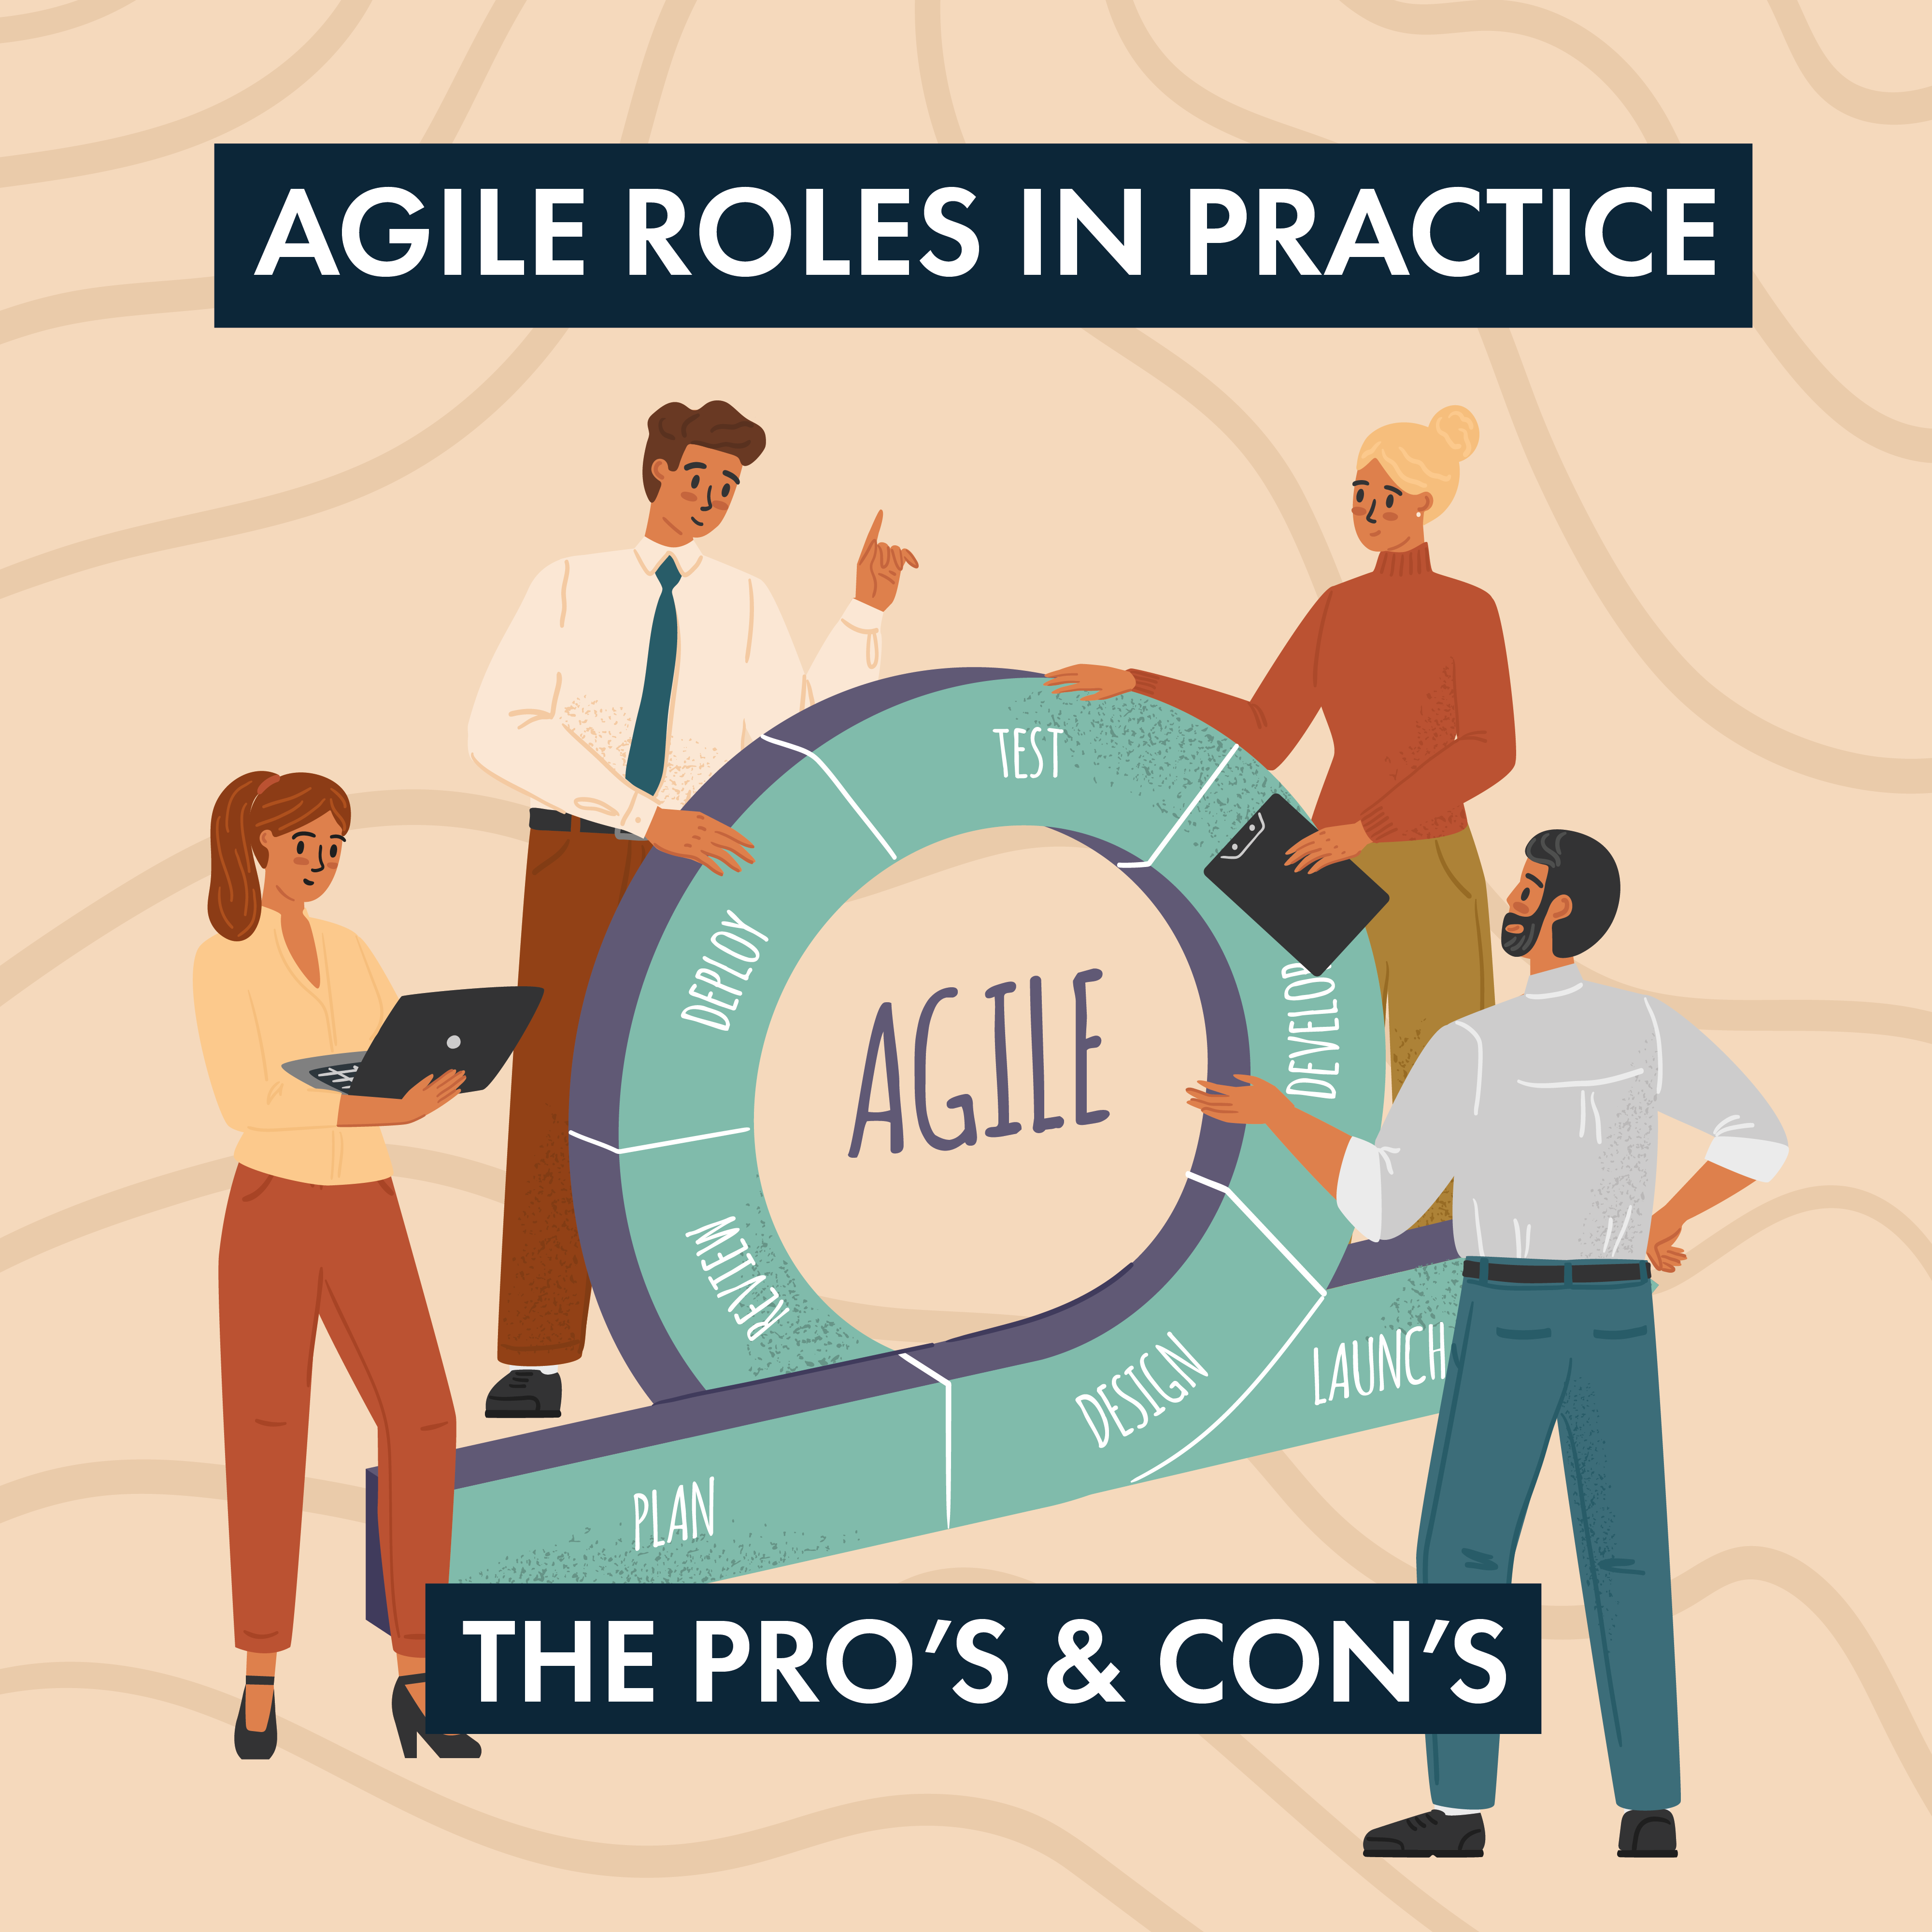 agile roles in practice, the pro's and con's